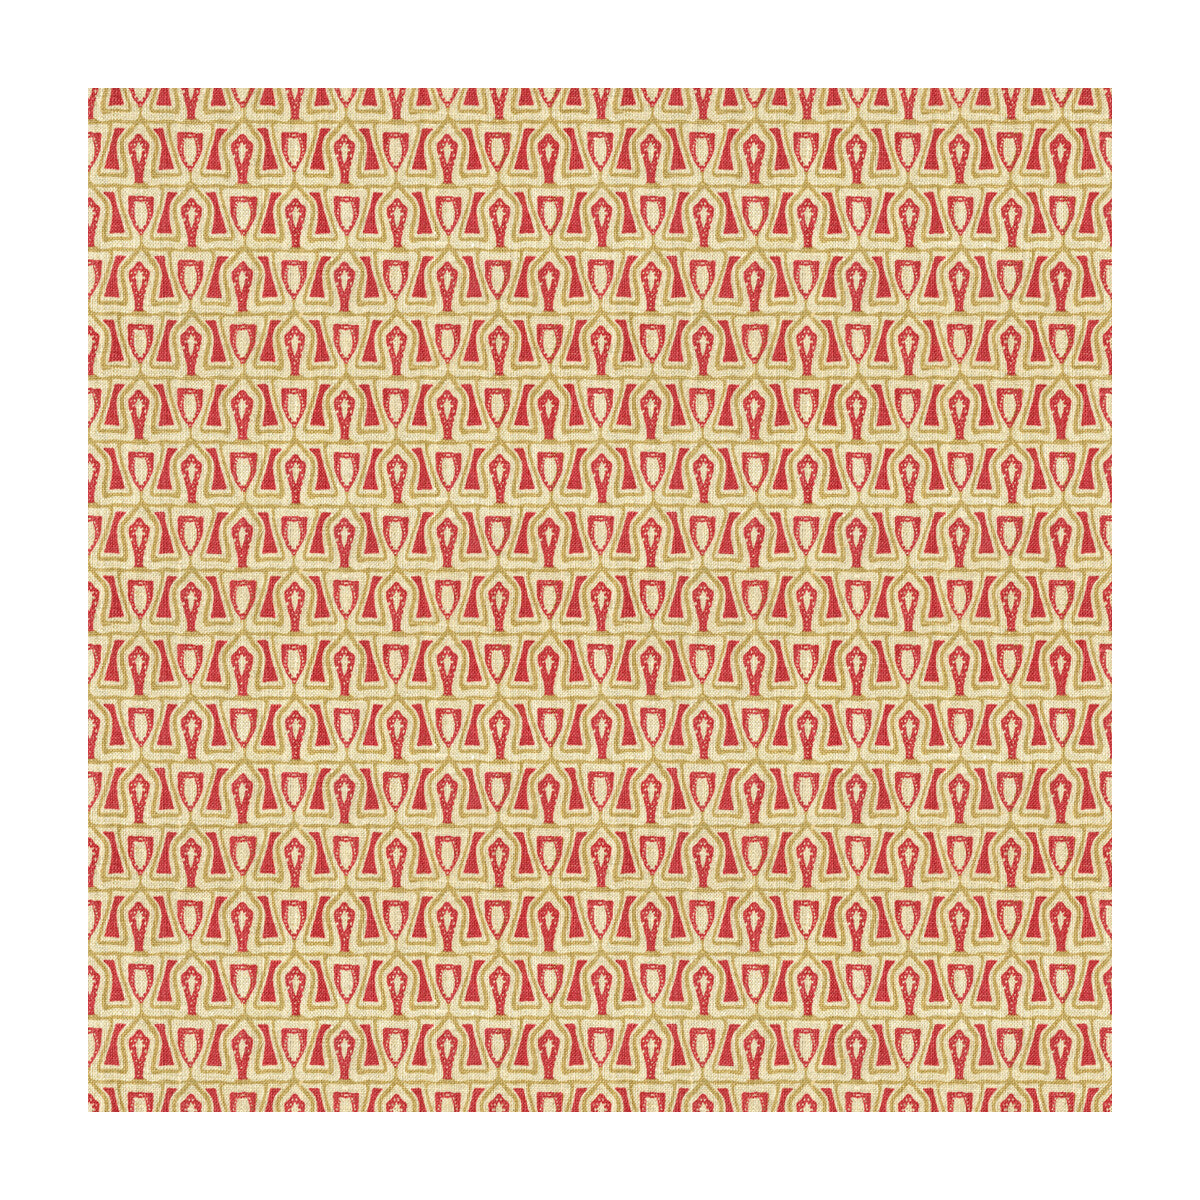 Passage fabric in cerise color - pattern GWF-3505.7.0 - by Lee Jofa Modern in the Allegra Hicks Garden collection